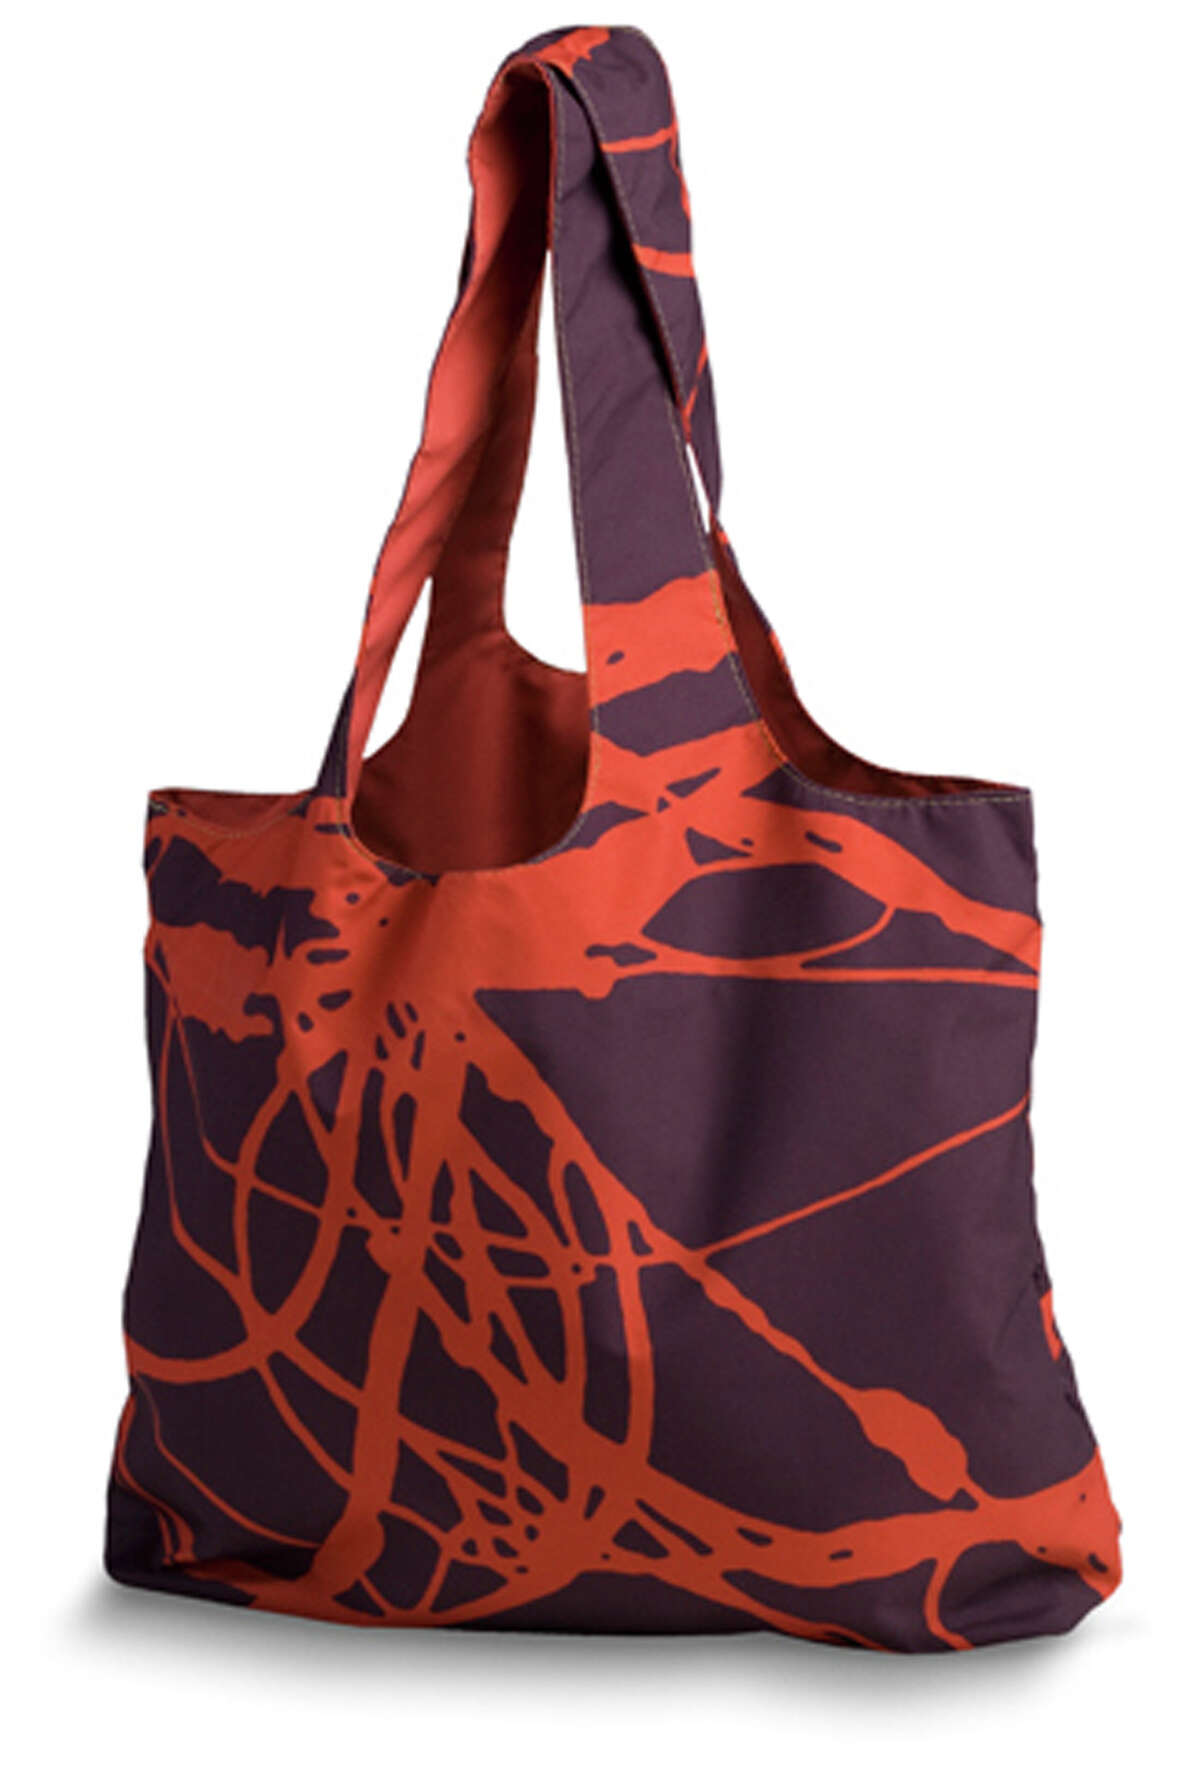 The Power Lines tote bag, sold at the Museum of Modern Art store and cryptonat home.com.